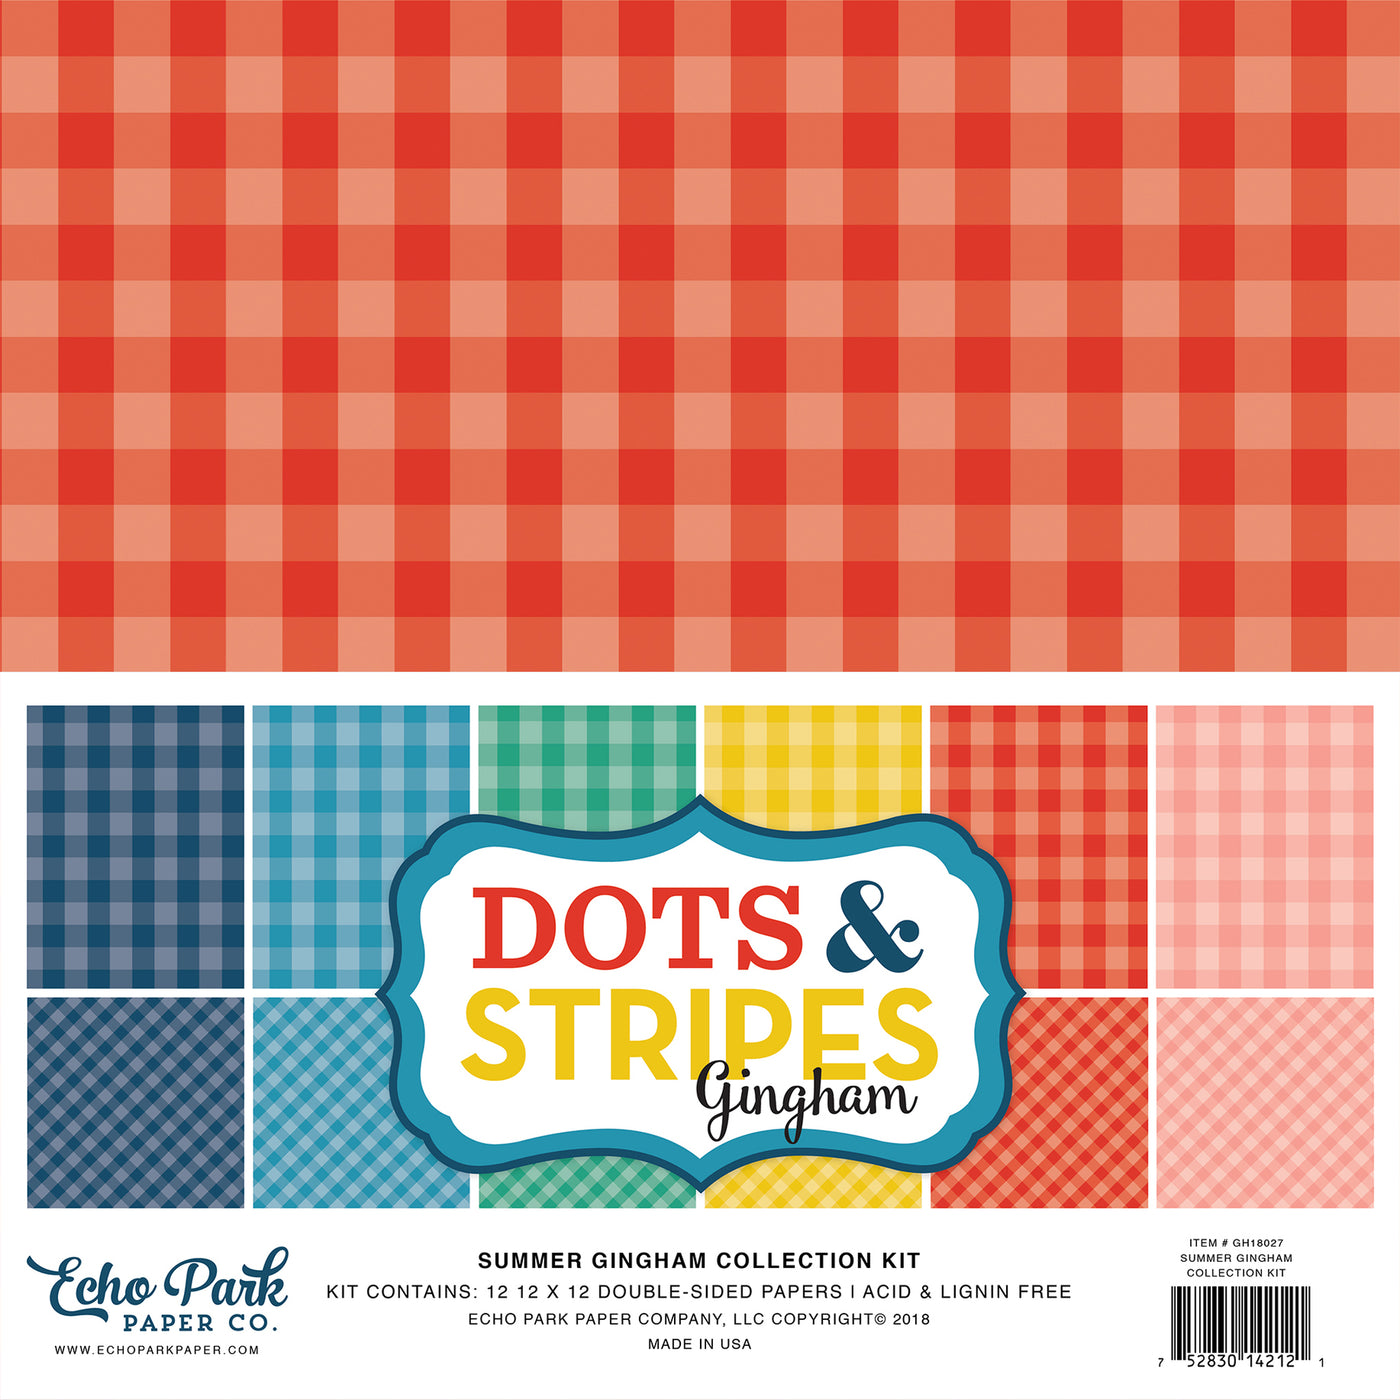 SUMMER GINGHAM Collection Kit - 12 double-sided cardstock sheets with six gingham colors - Echo Park